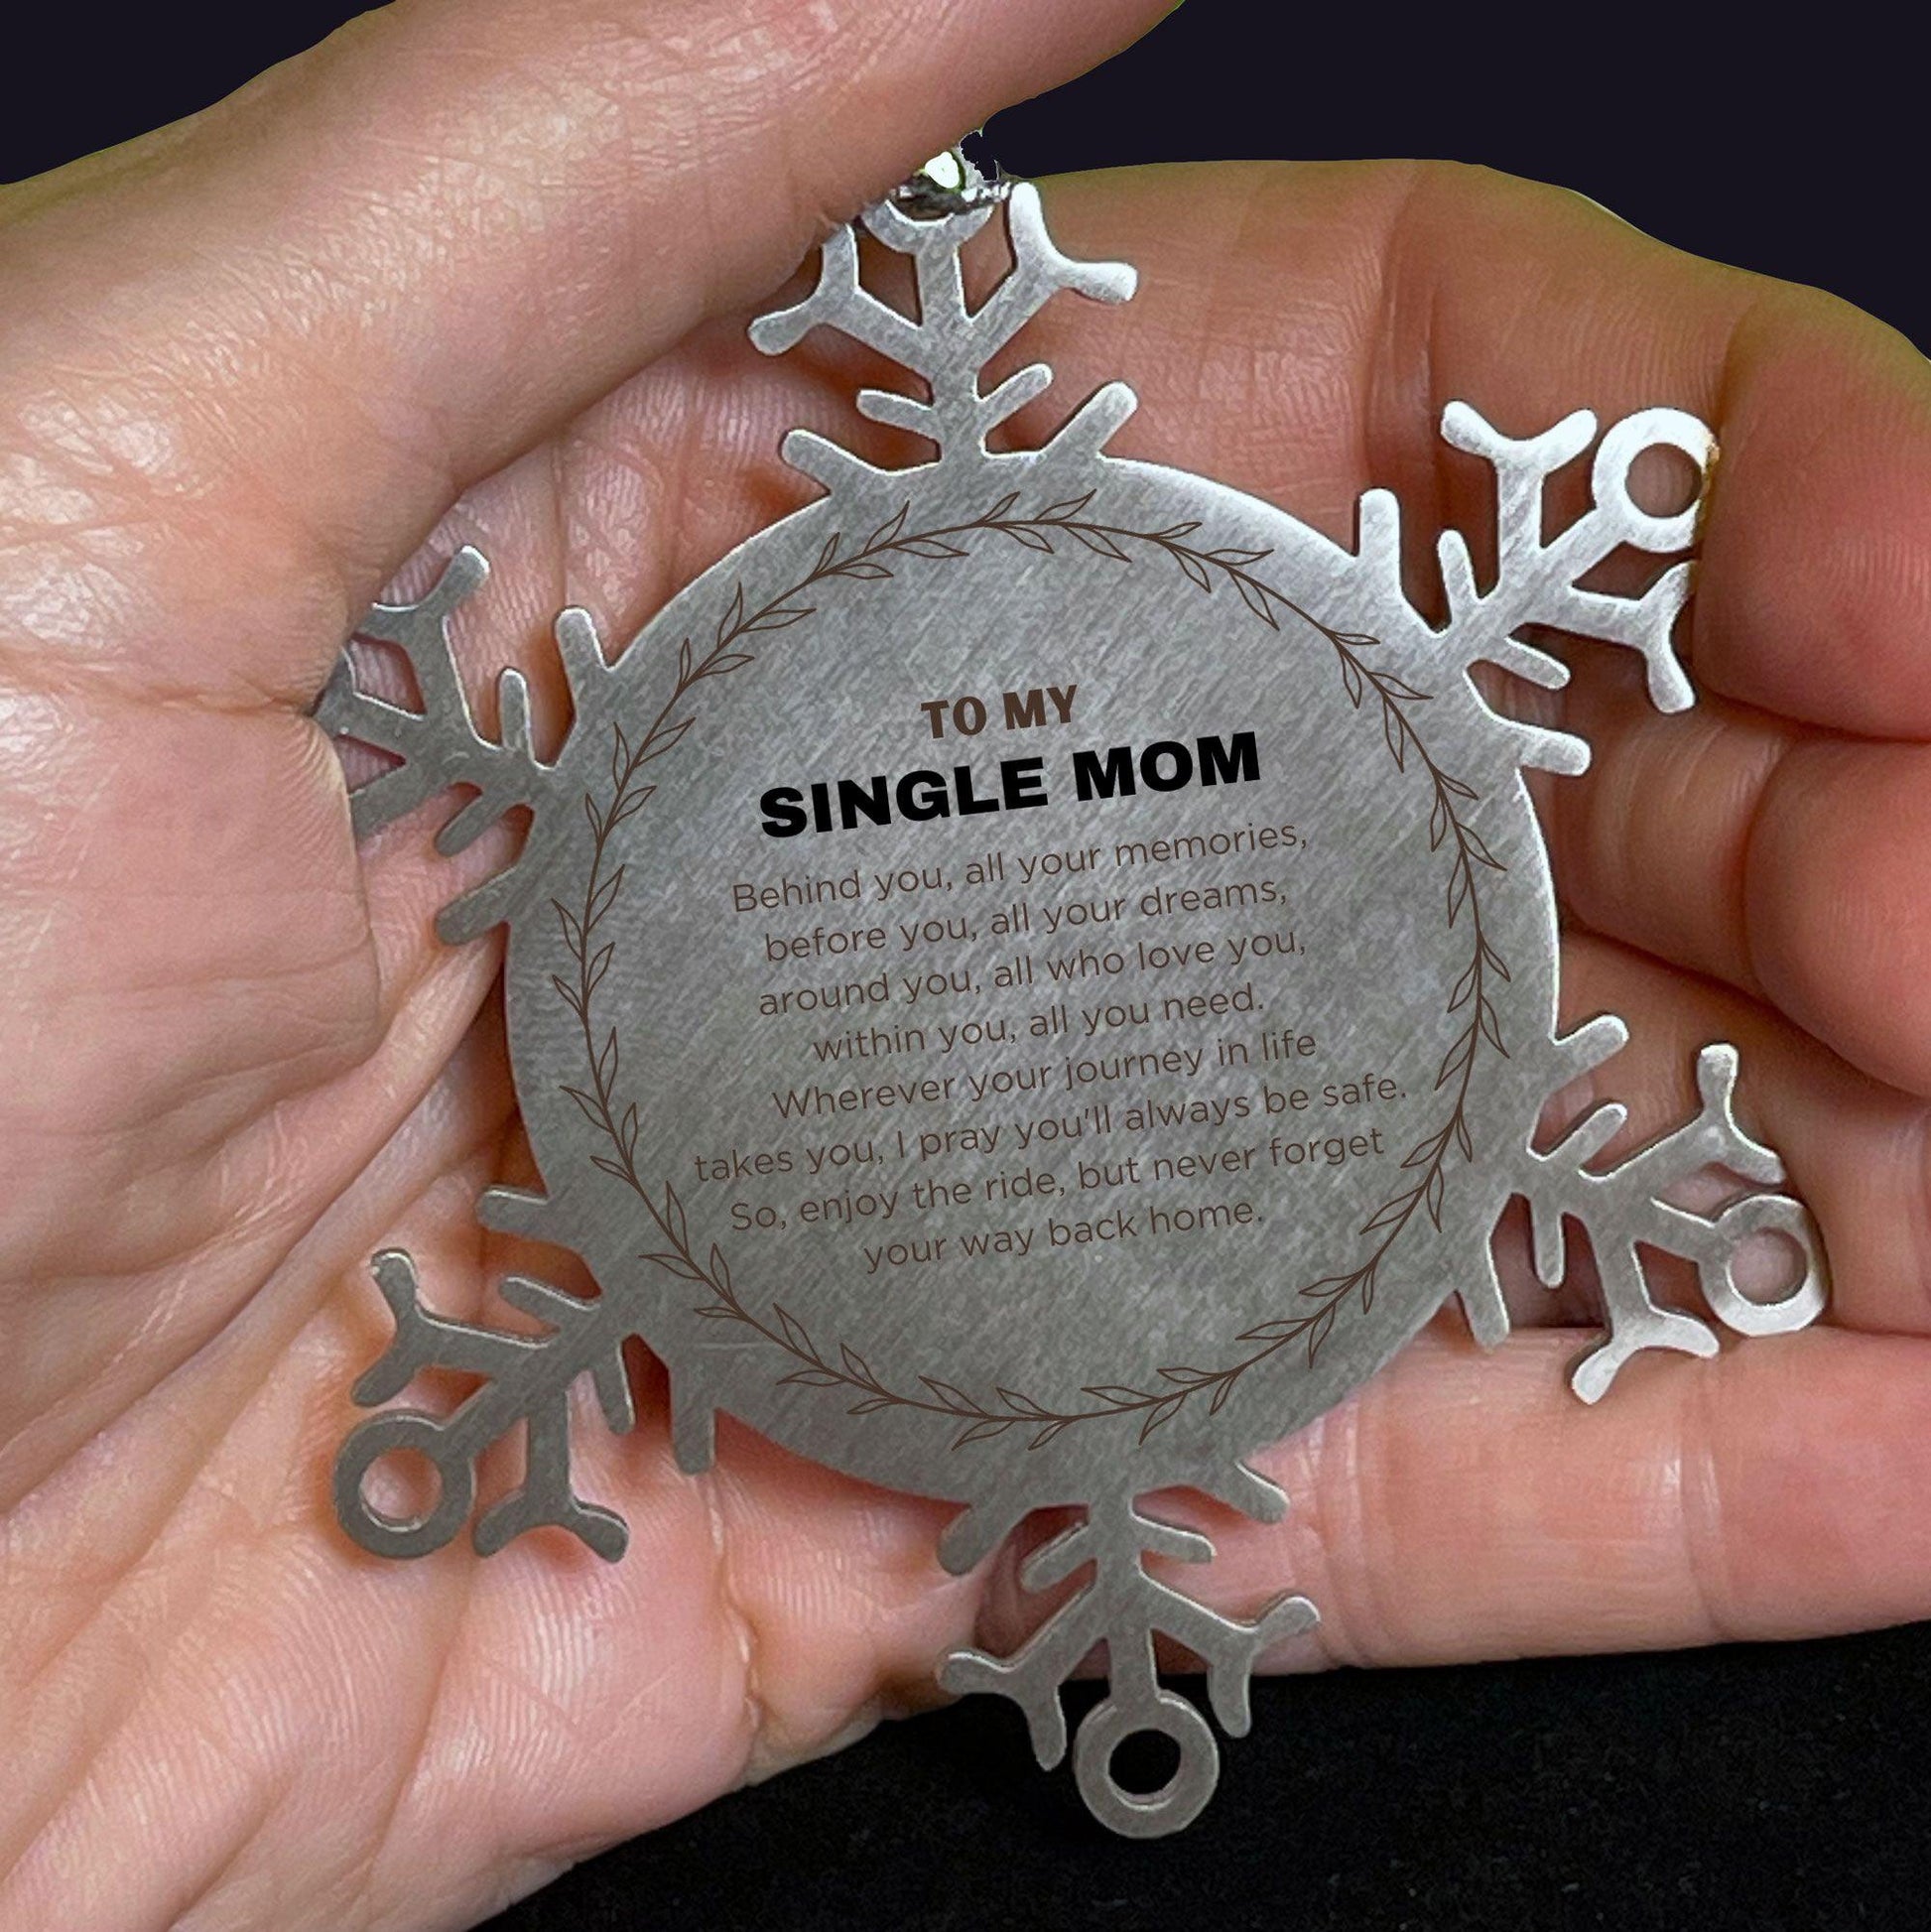 Inspirational Single Mom Snowflake Ornament - Behind you, all your Memories, Before you, all your Dreams - Birthday, Christmas Holiday Gifts - Mallard Moon Gift Shop